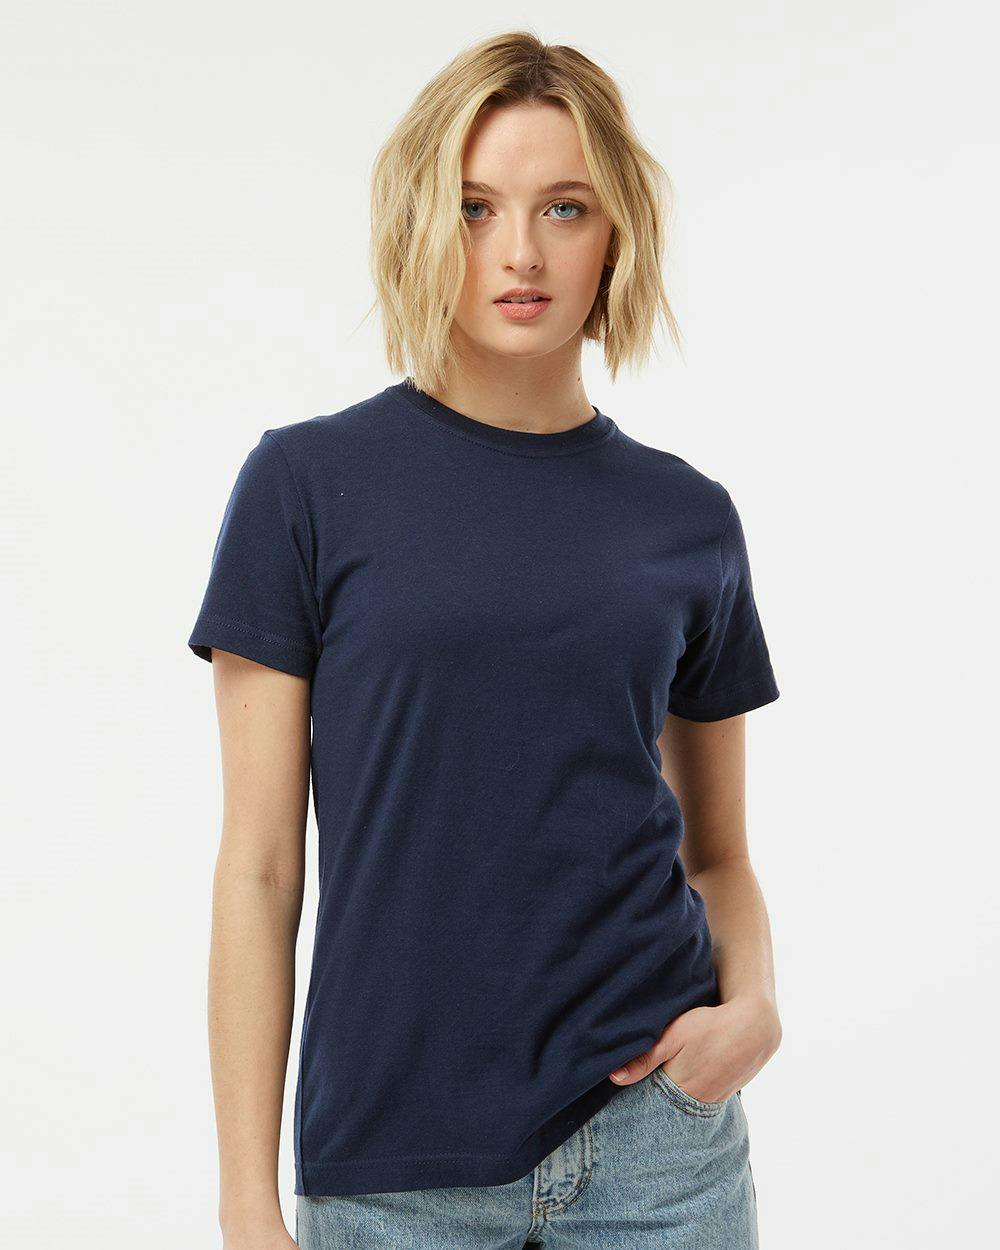 Image for Women's Fine Jersey Classic Fit T-Shirt - 216